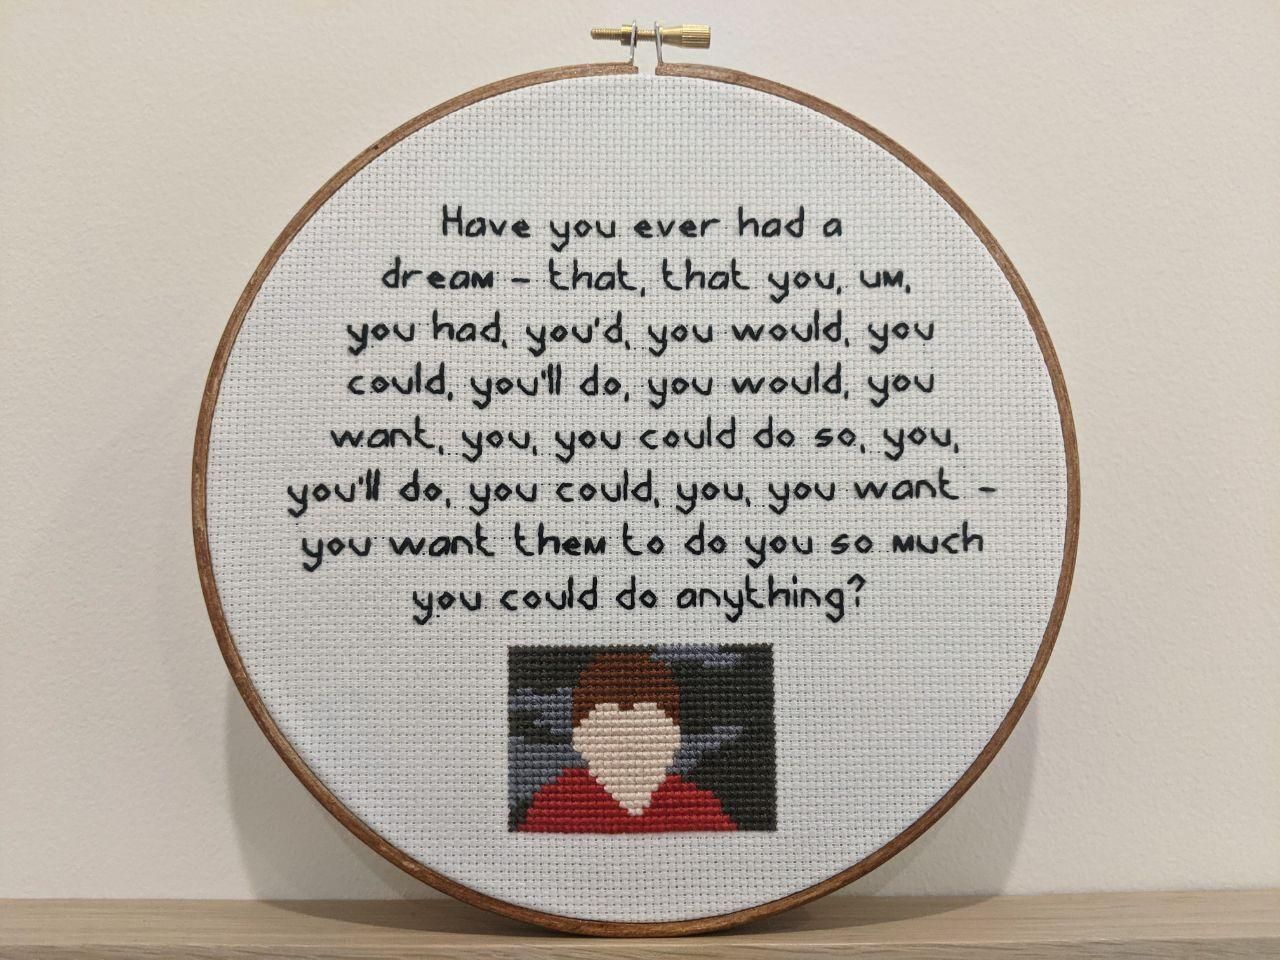 I cross stitched one of my favourite quotes from the internet!